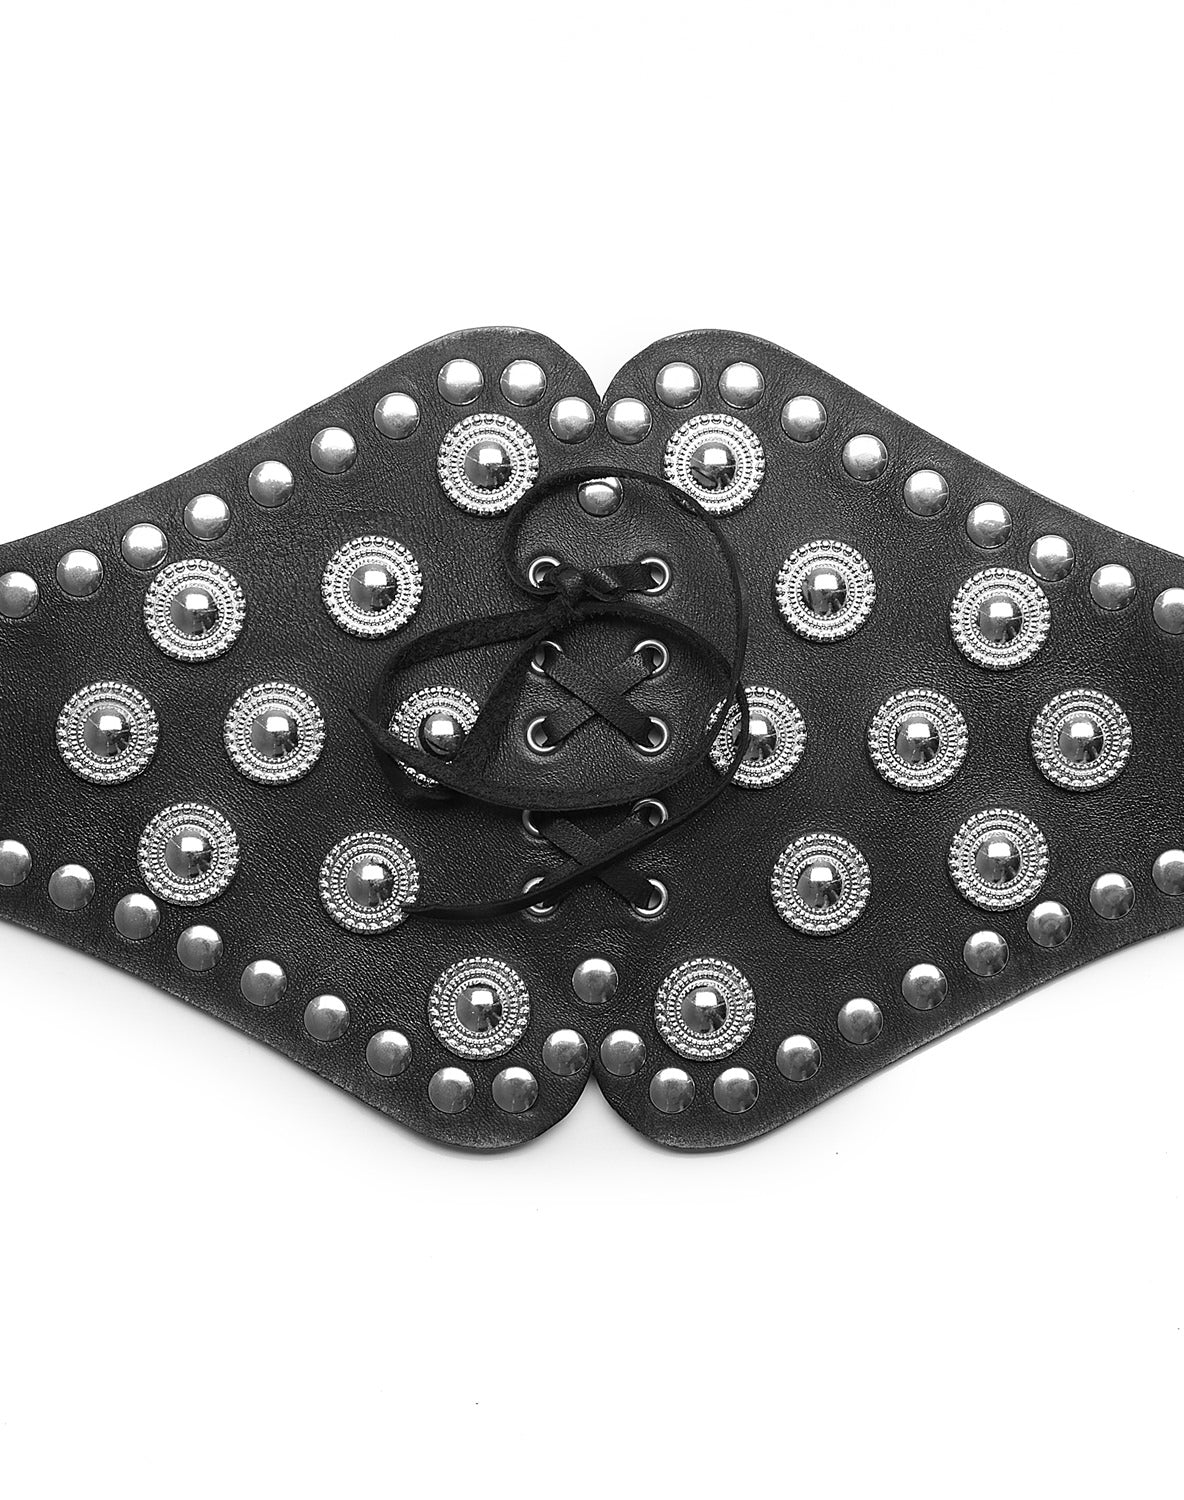 MAYFLOWER BUSTIER Black leather bustier with studs and metal details. Central leather lace. HTC LOS ANGELES